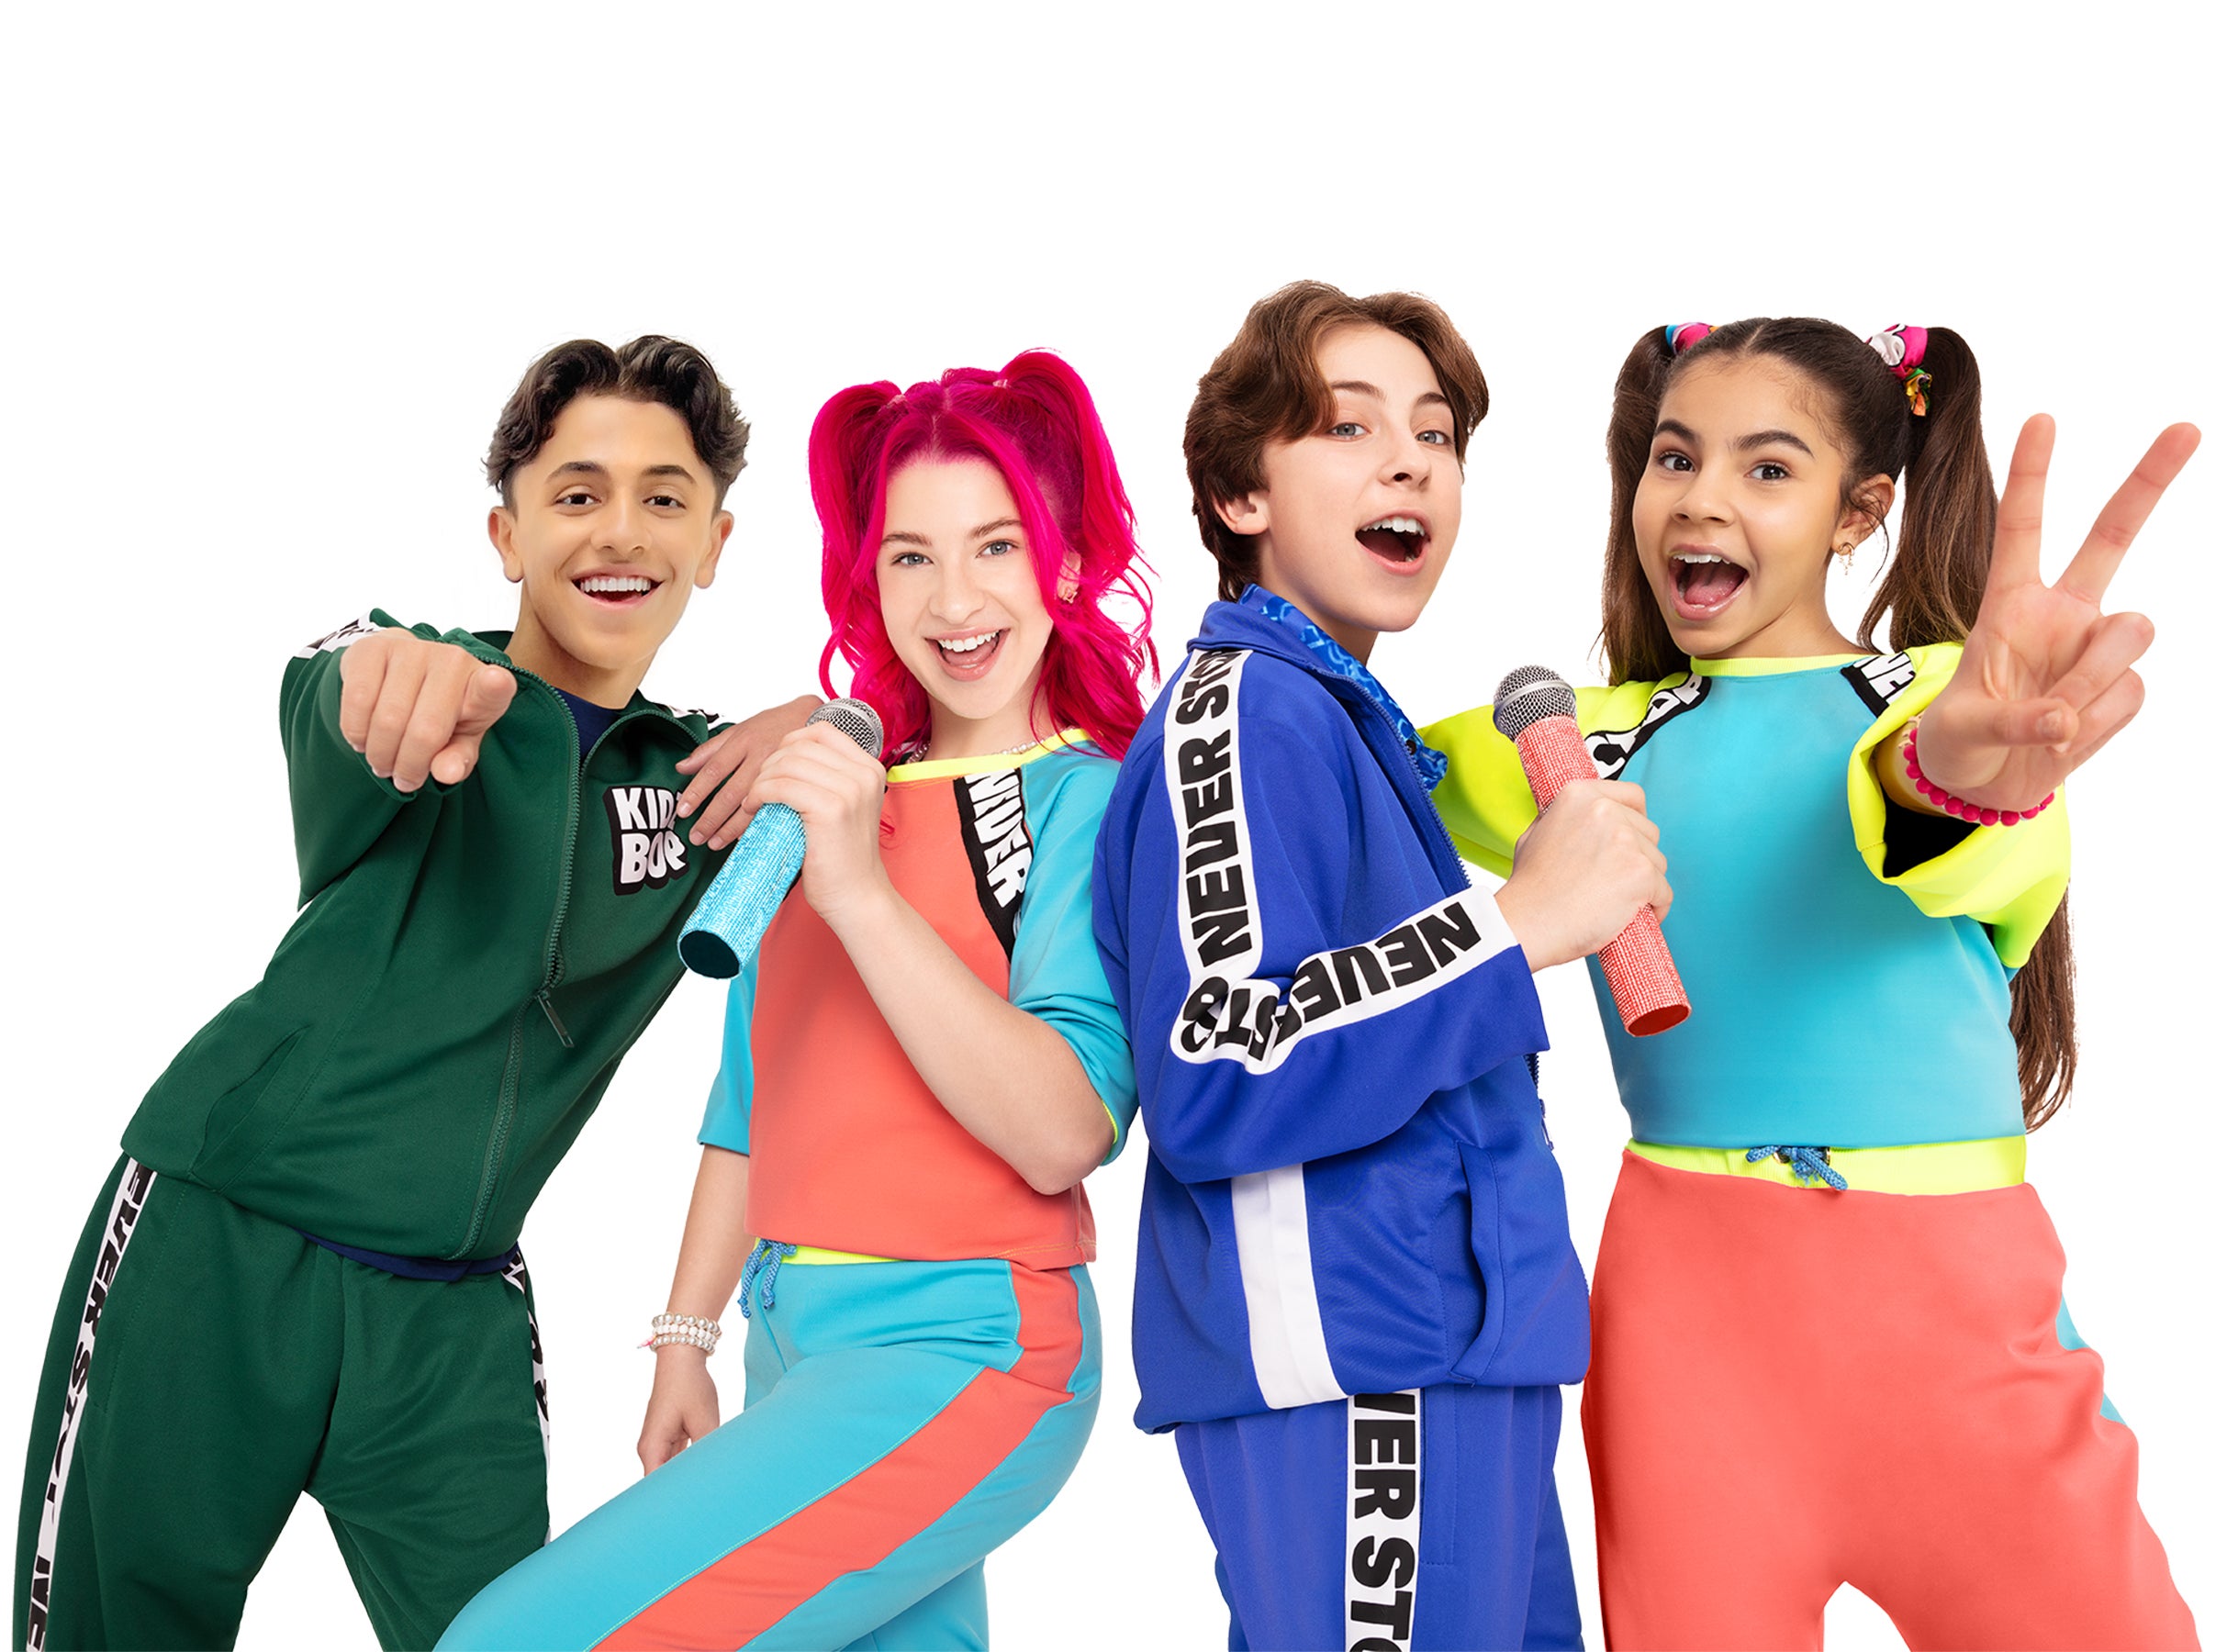 KIDZ BOP Never Stop Live Tour pre-sale code for event tickets in Fort Worth, TX (Will Rogers Auditorium)